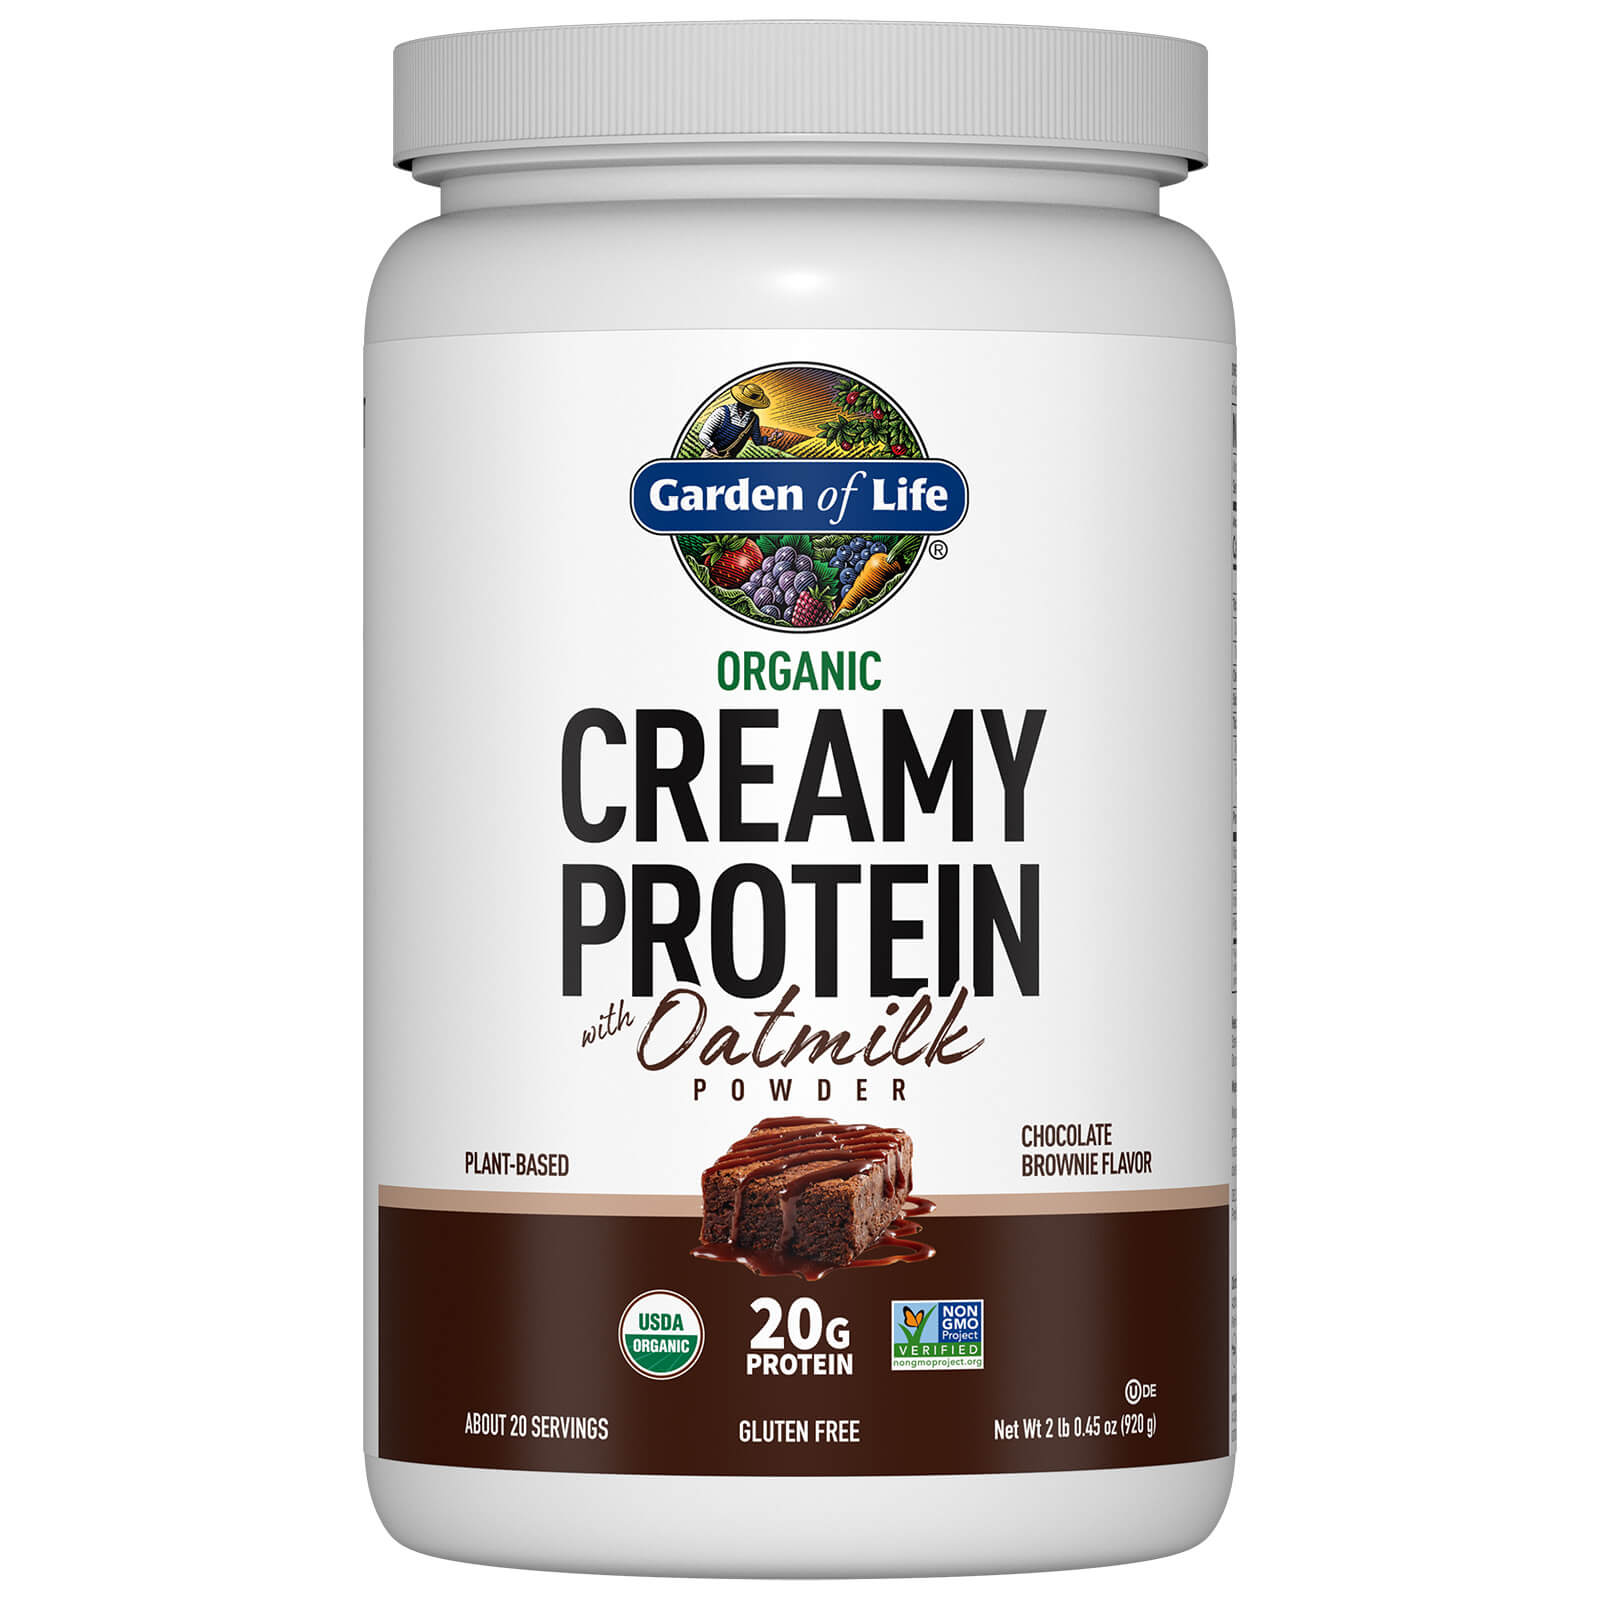 Creamy Plant Based Protein Powder with Oat Milk - Chocolate